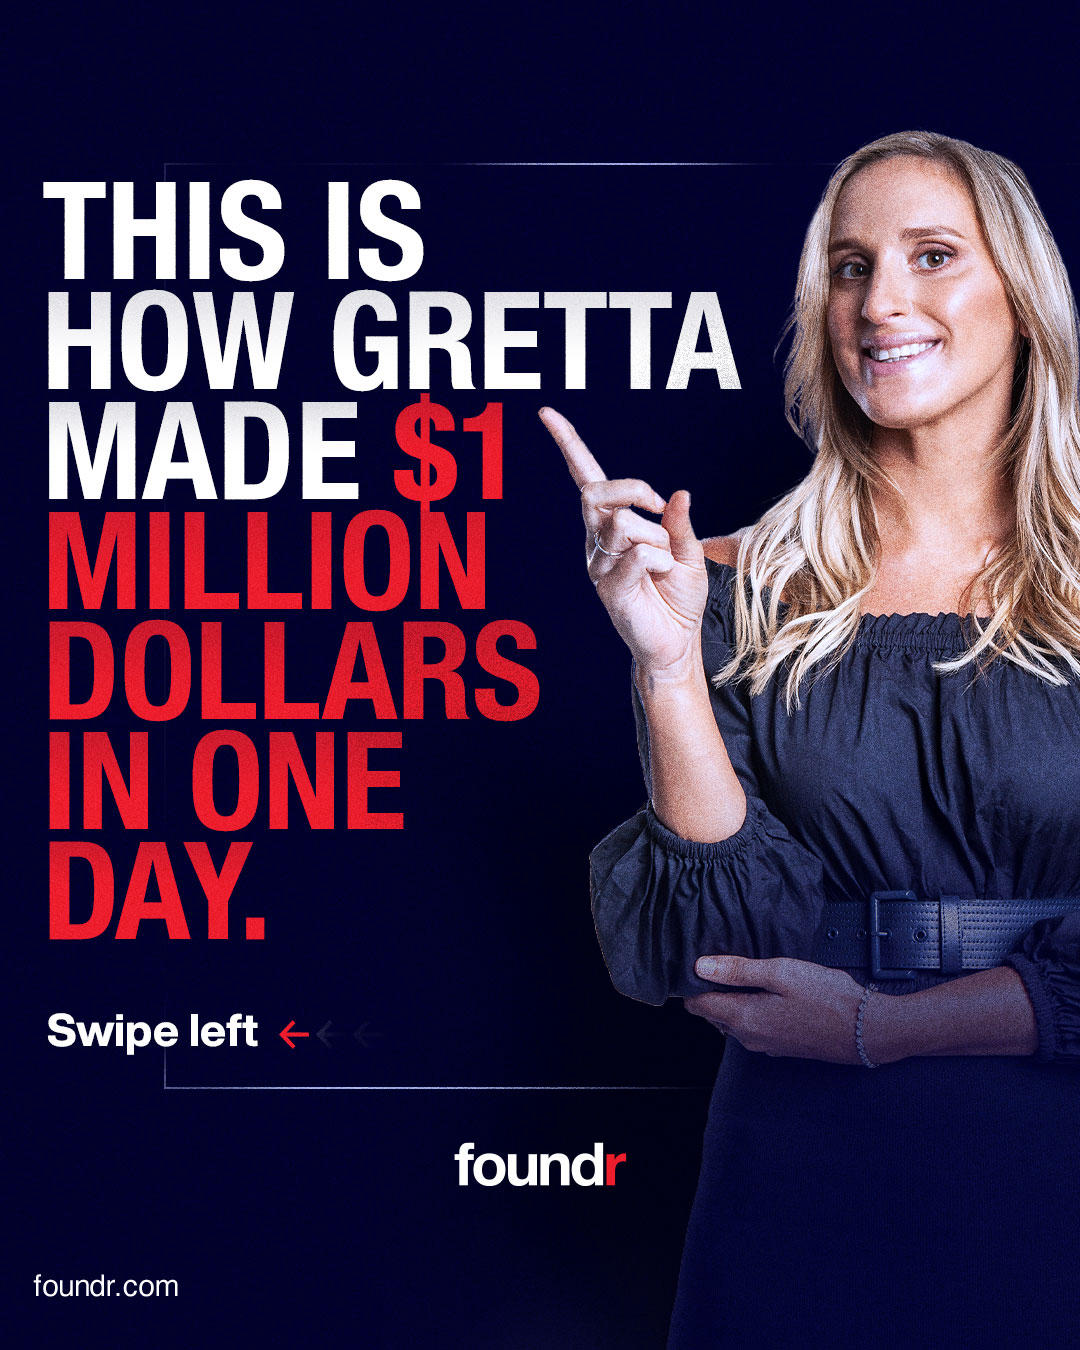 Foundr - How did #gretta Van Riel make $1 million in one day selling watches